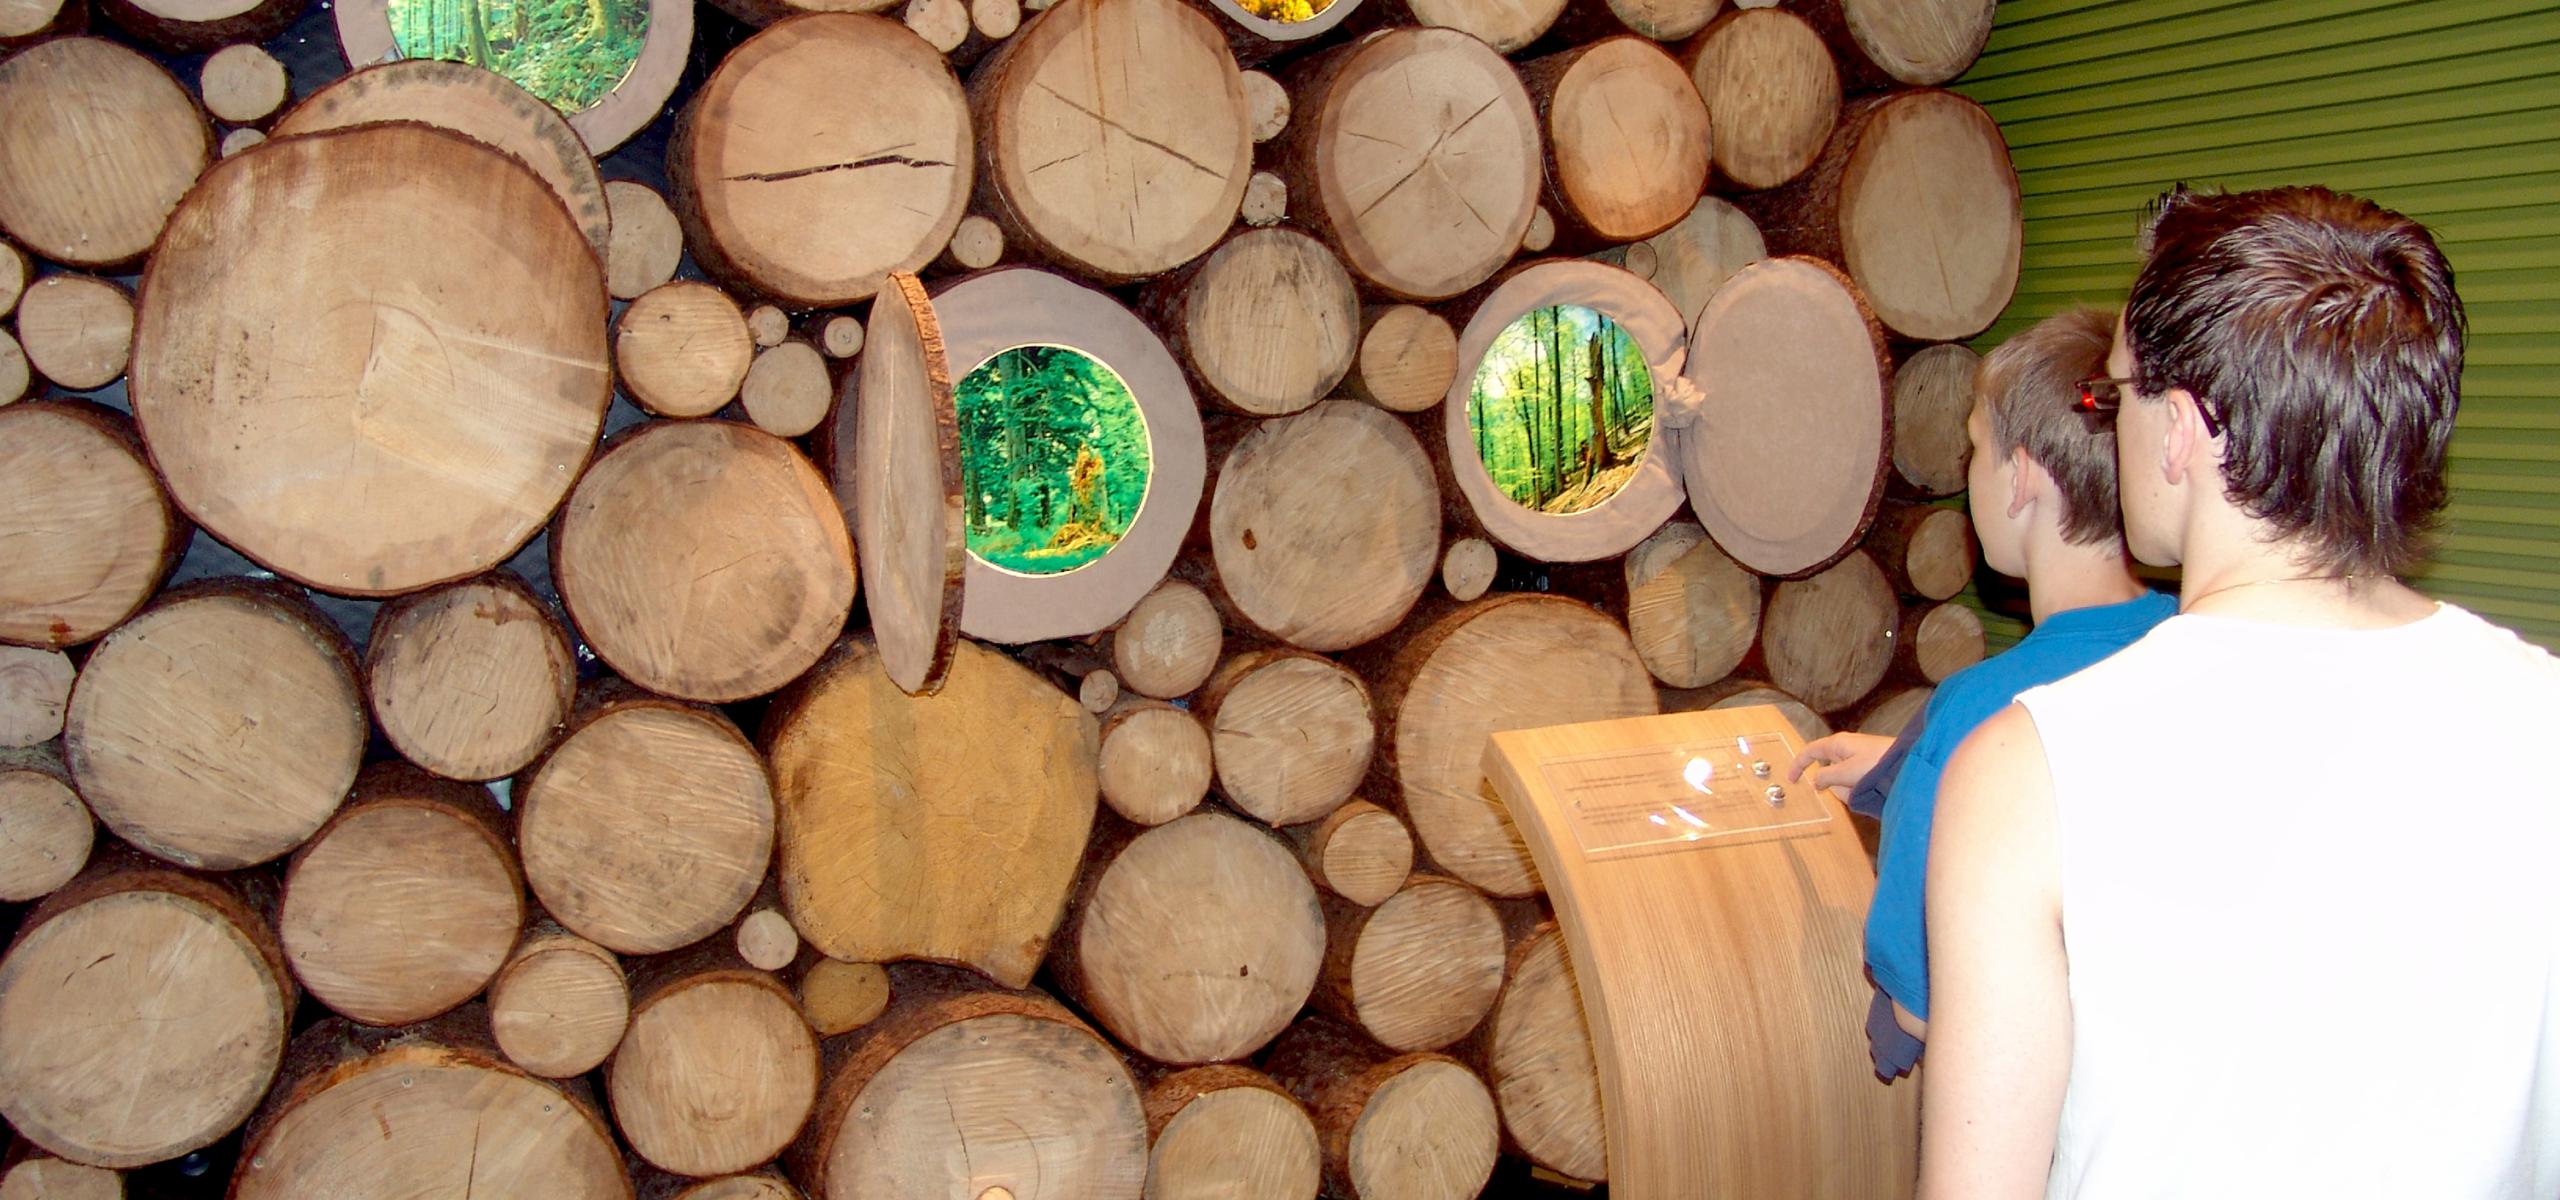 Exhibition element shows tree trunks on whose cut surface windows with forest images open